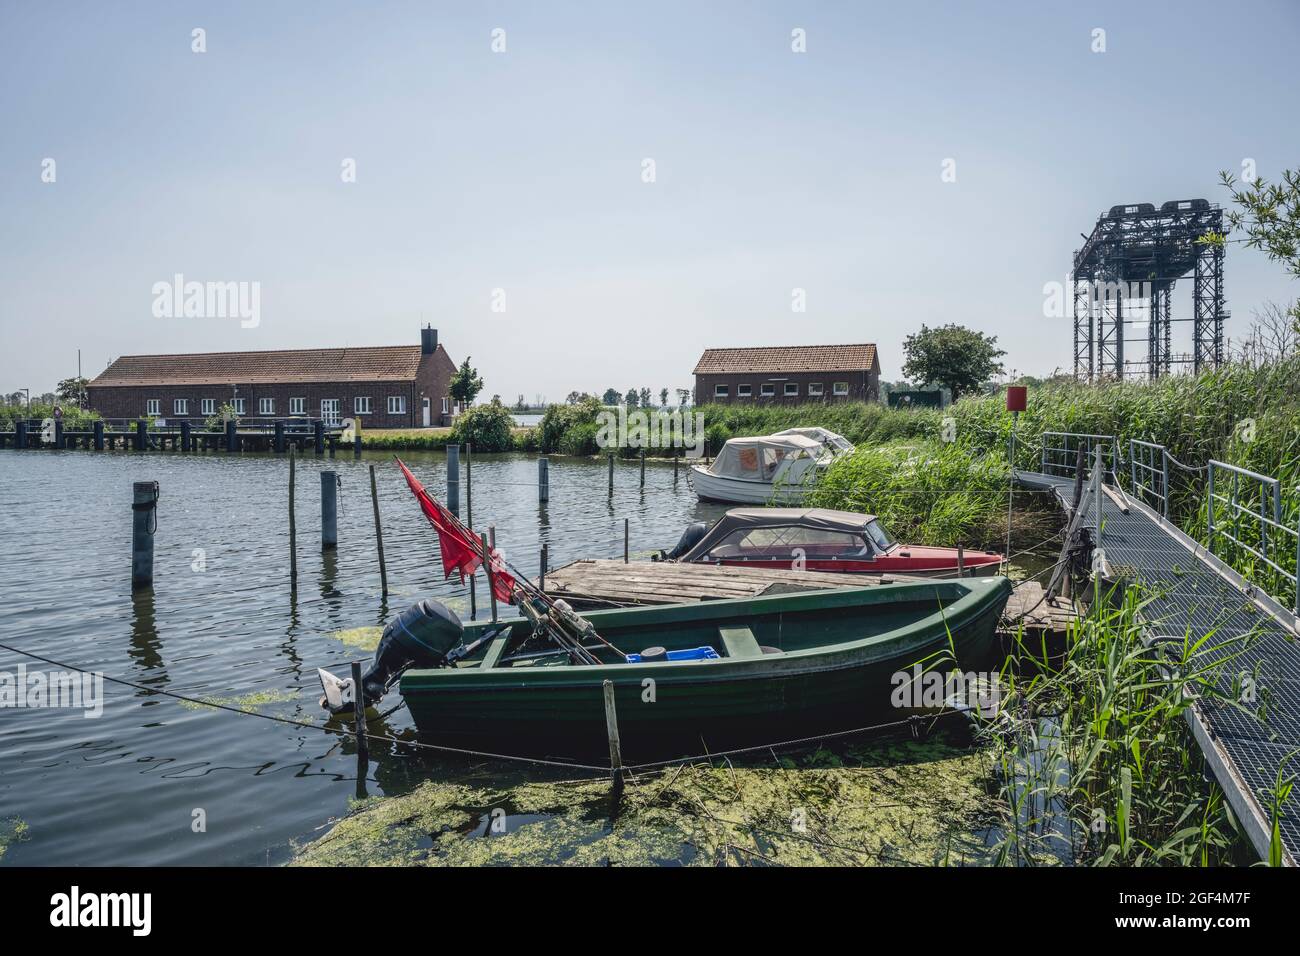 Motorboats moored at lakeshore in summer Stock Photo